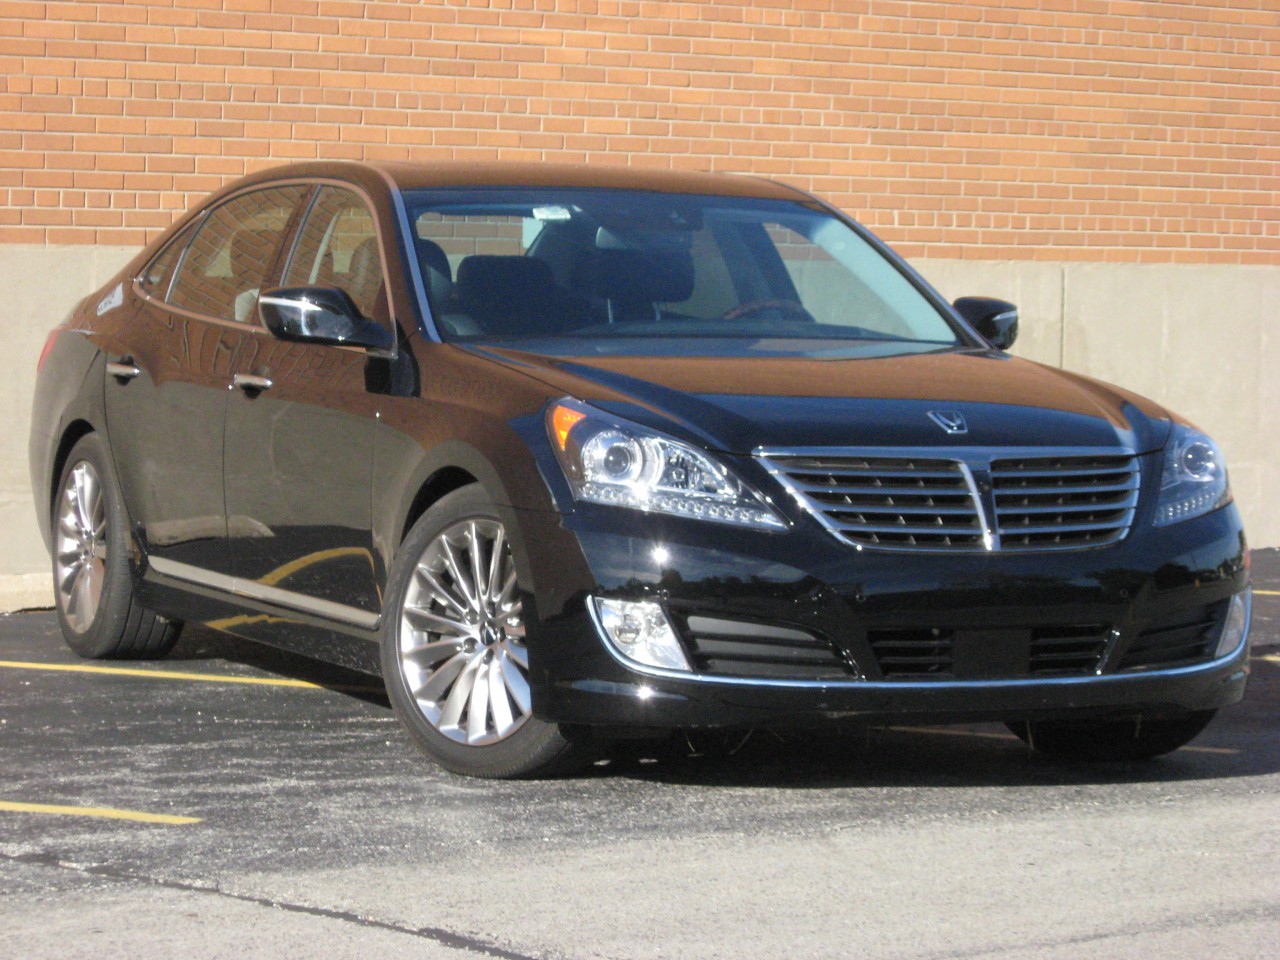 Test Drive: 2014 Hyundai Equus Ultimate | The Daily Drive | Consumer Guide®  The Daily Drive | Consumer Guide®